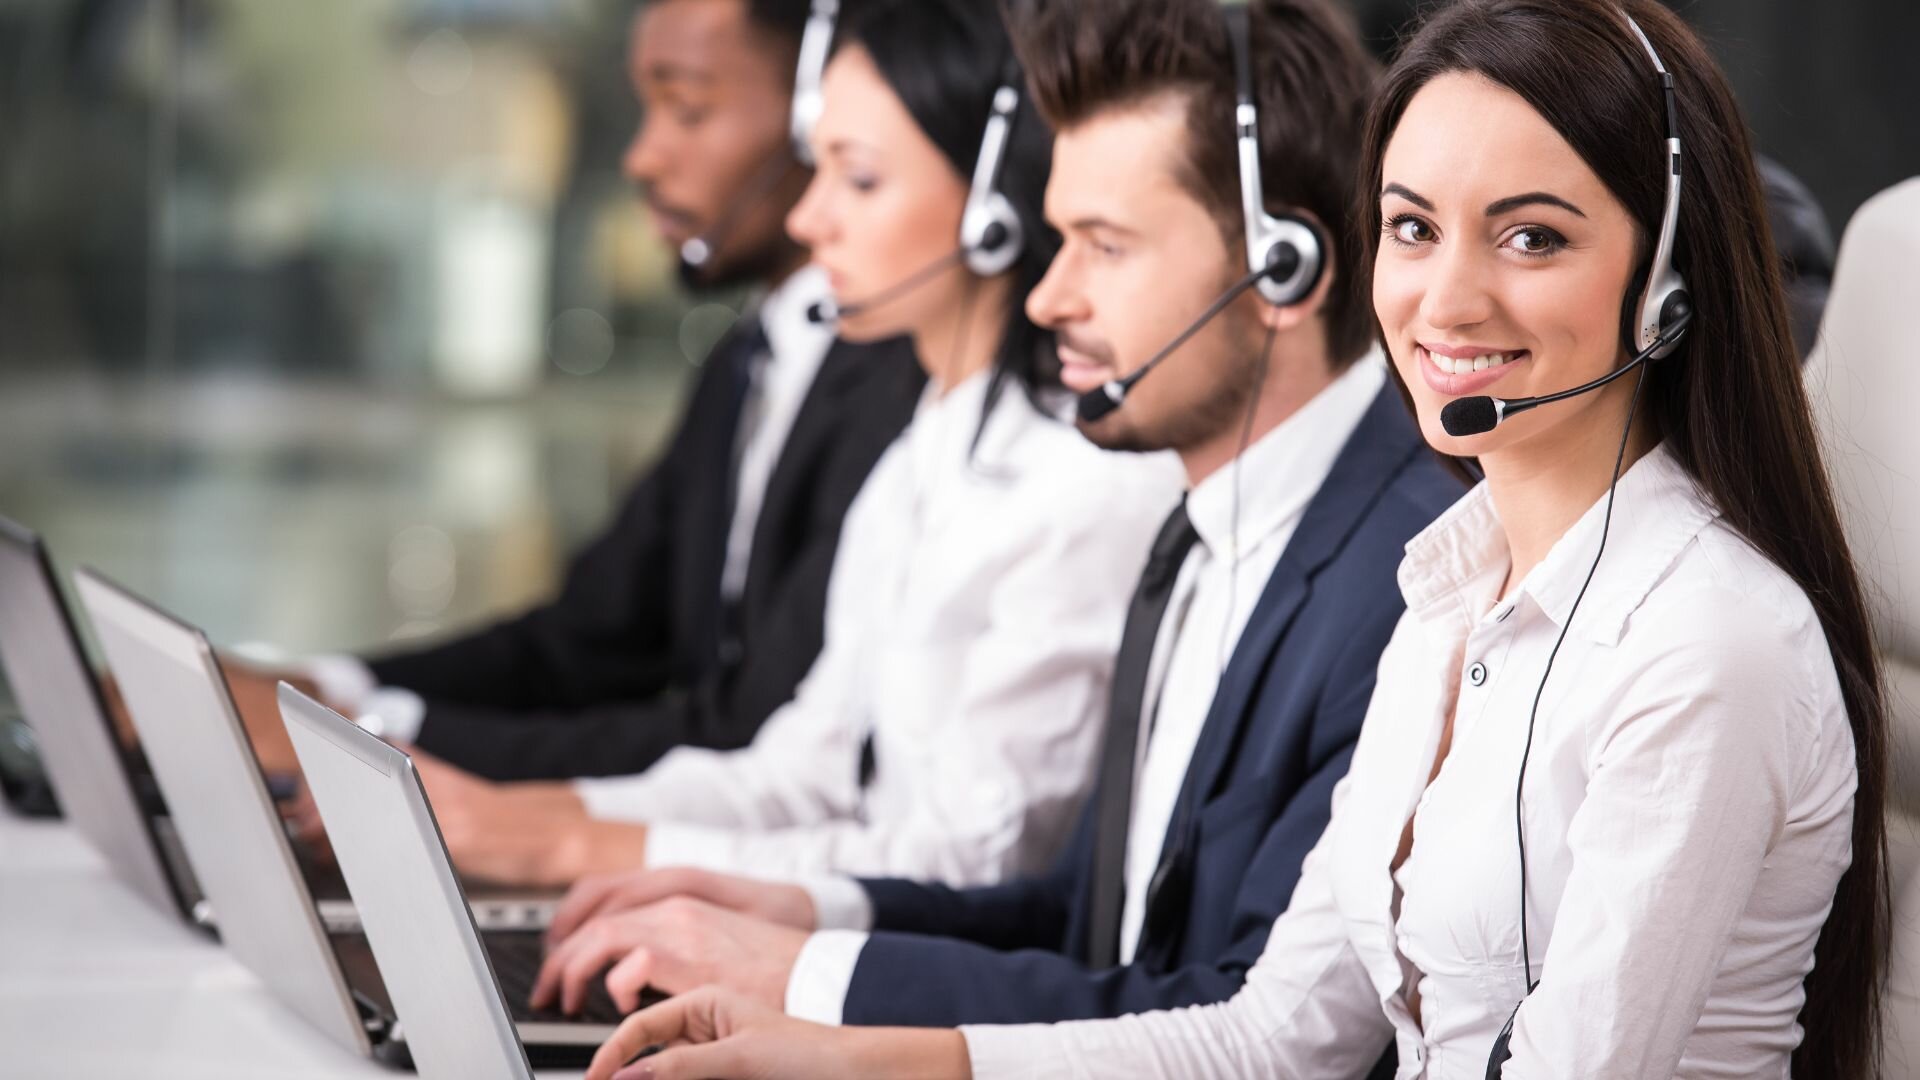 Popular Customer Service Channels and How to Optimize Them